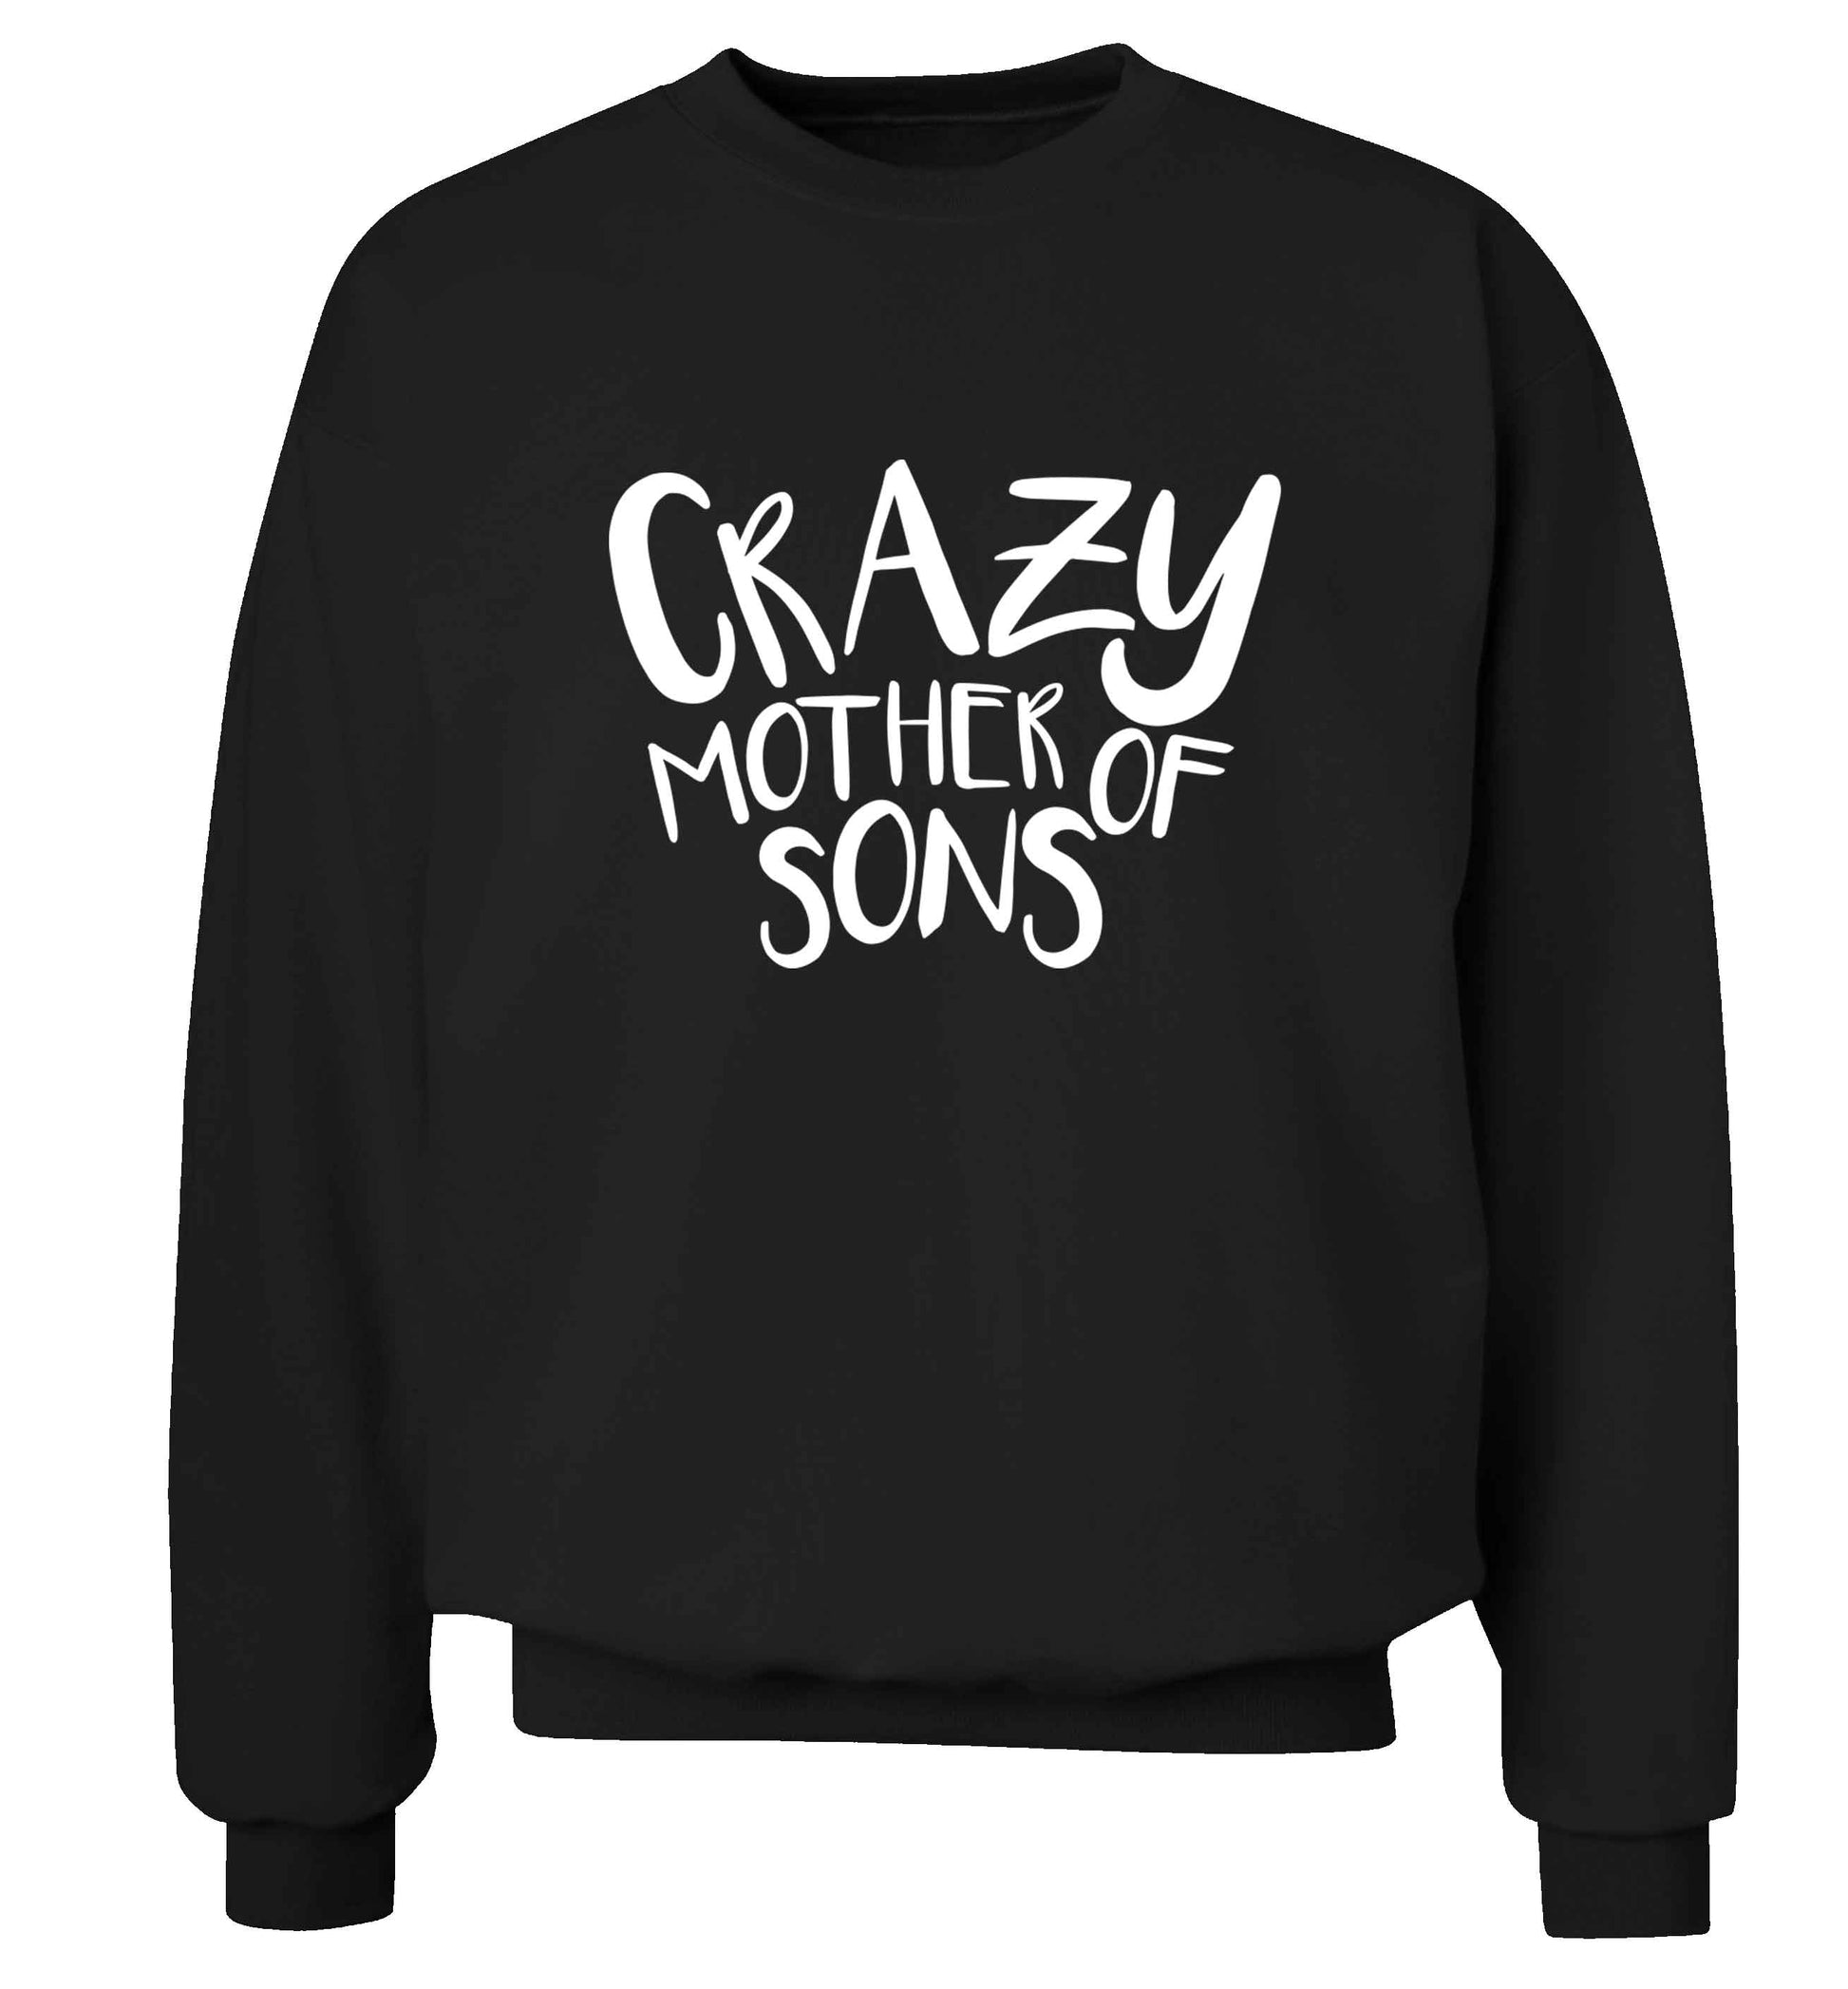 Crazy mother of sons adult's unisex black sweater 2XL